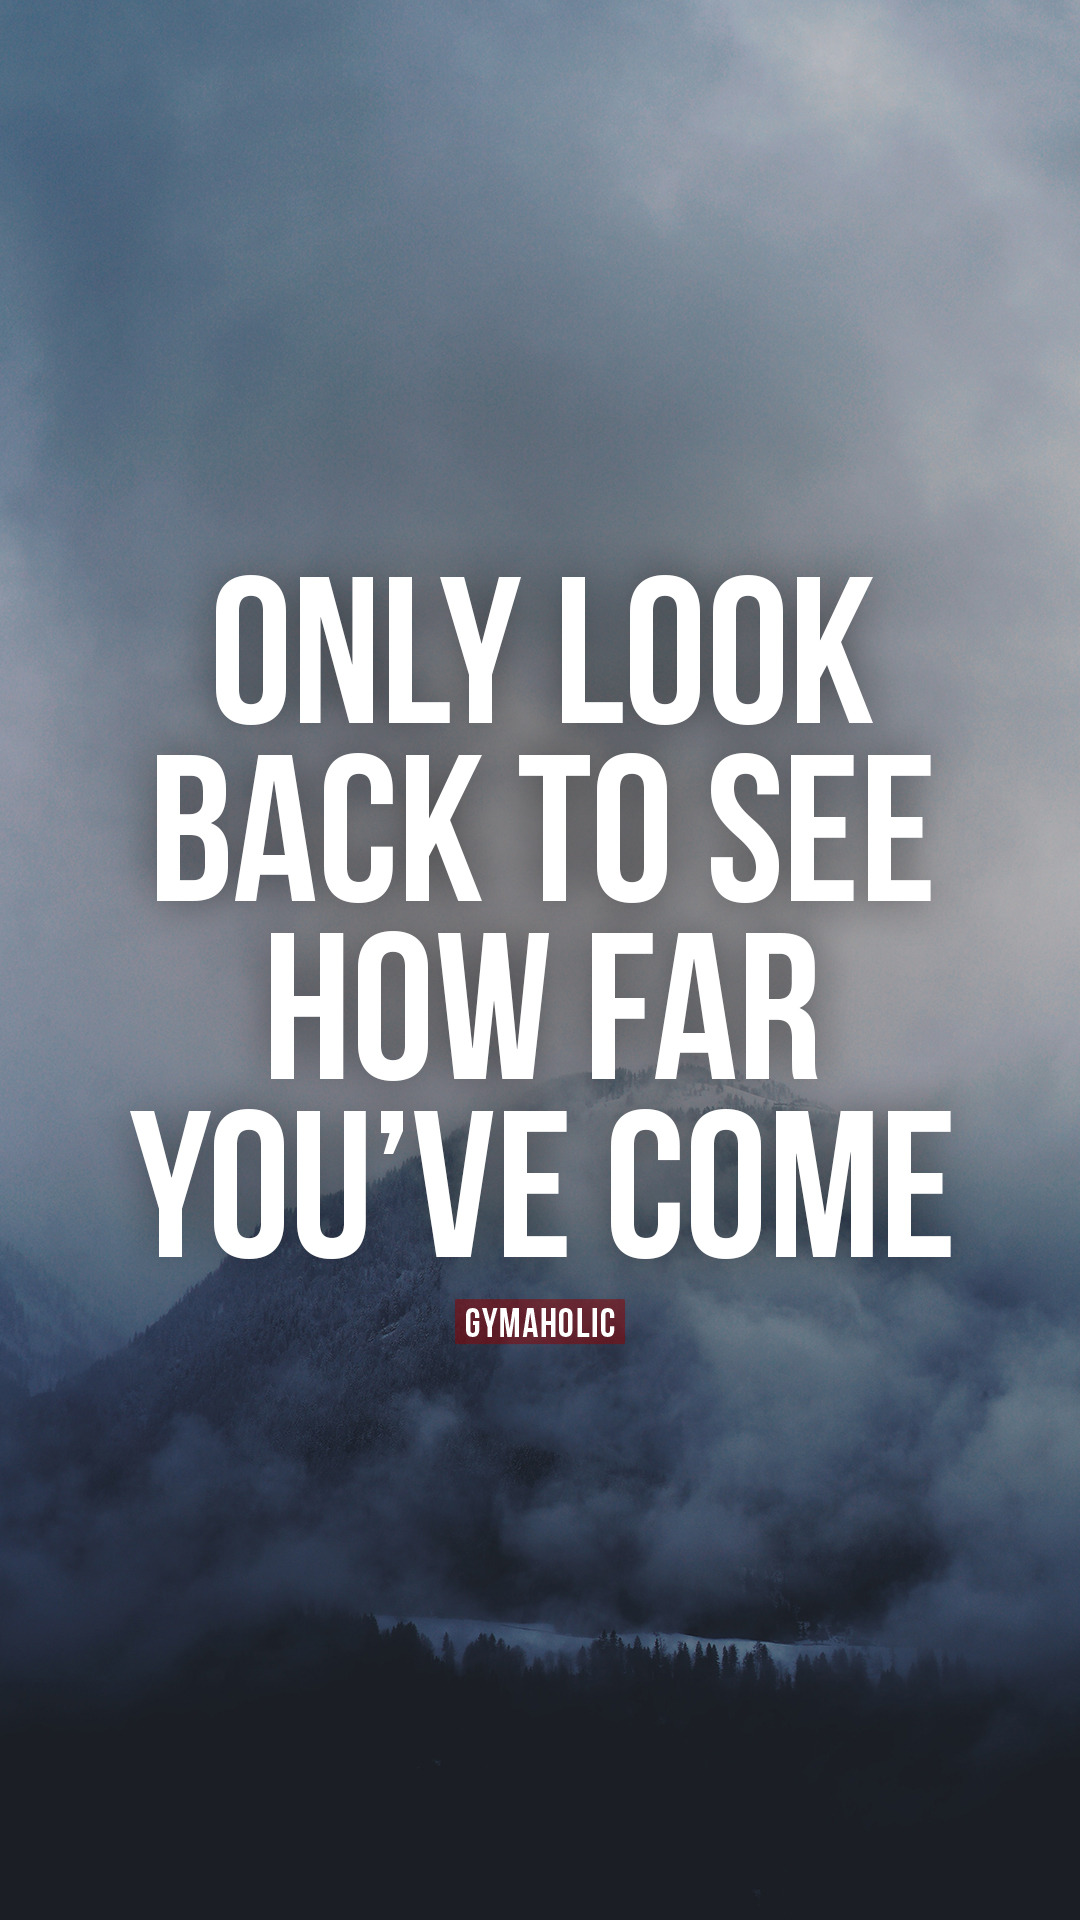 Only look back to see how far you’ve come